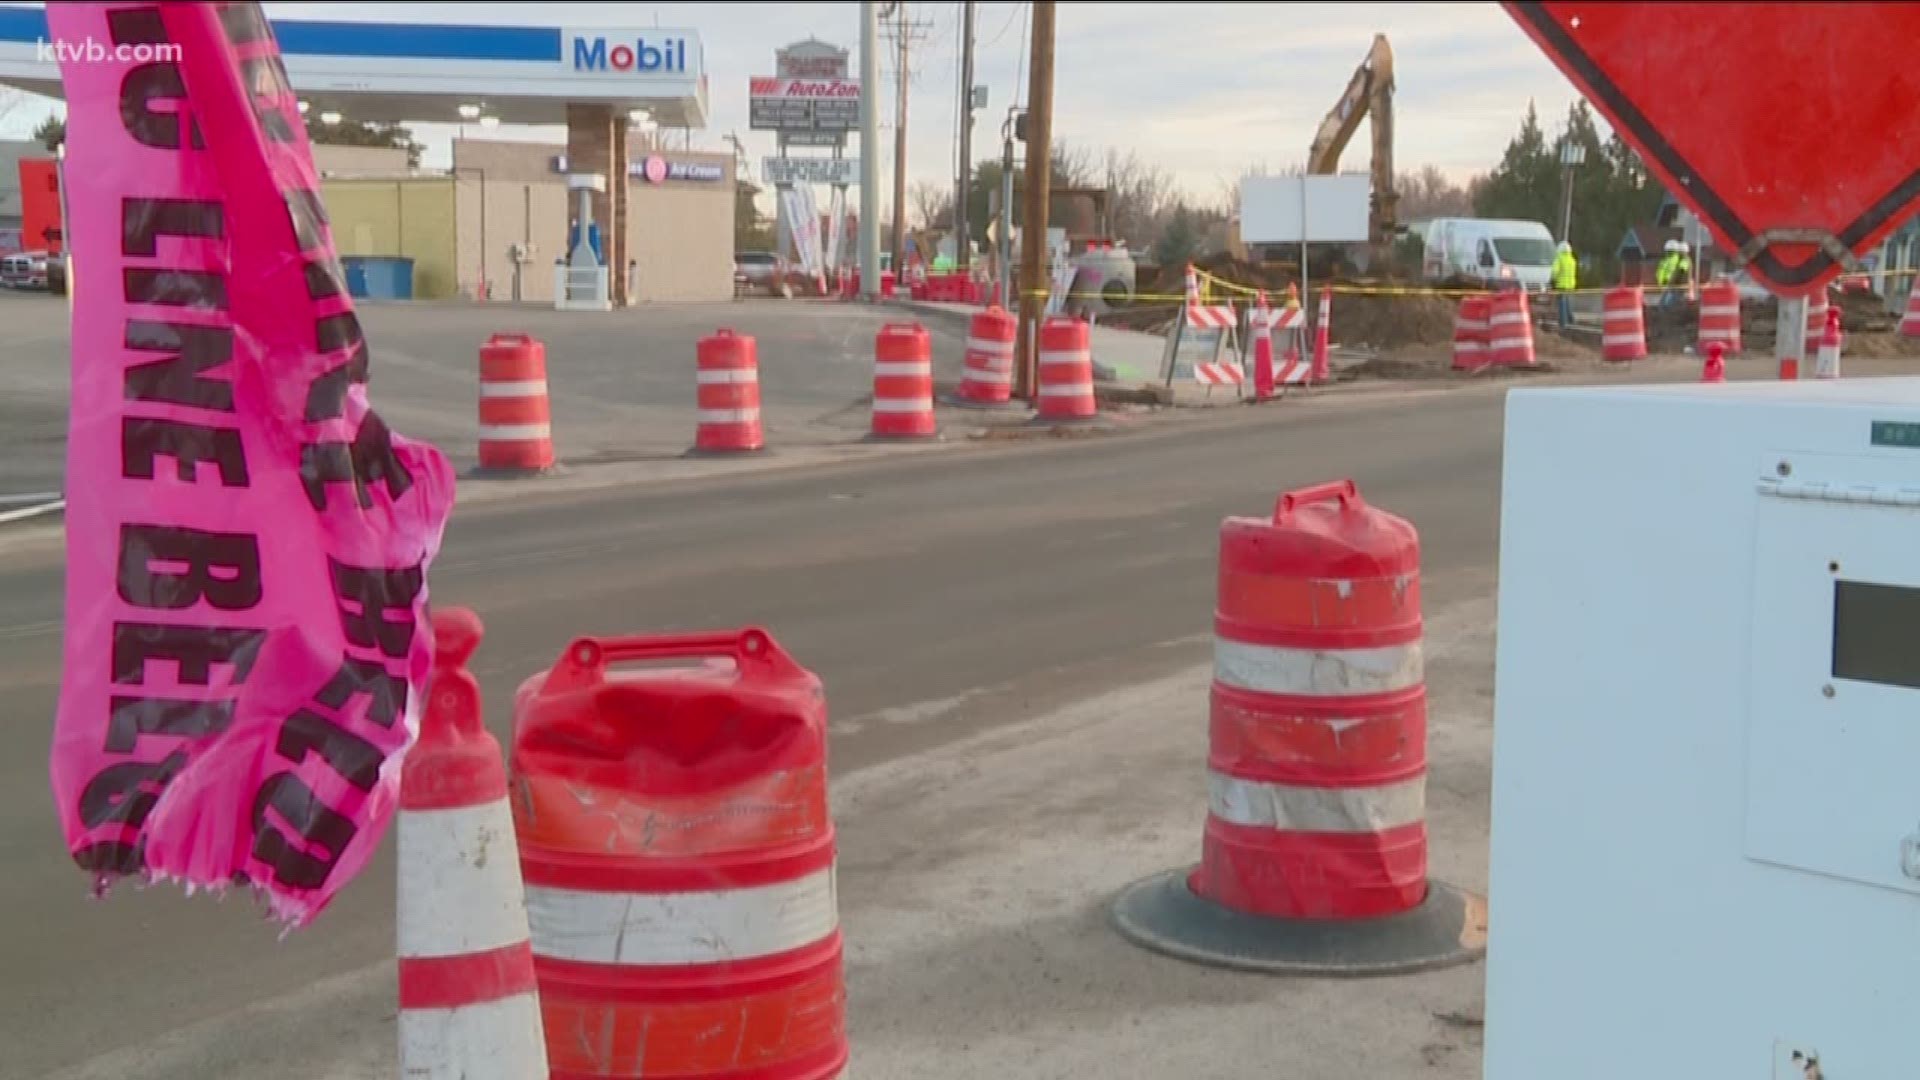 As the major intersection rebuild is underway, some businesses say construction at their front doors is impacting their bottom line or day-to-day operations.